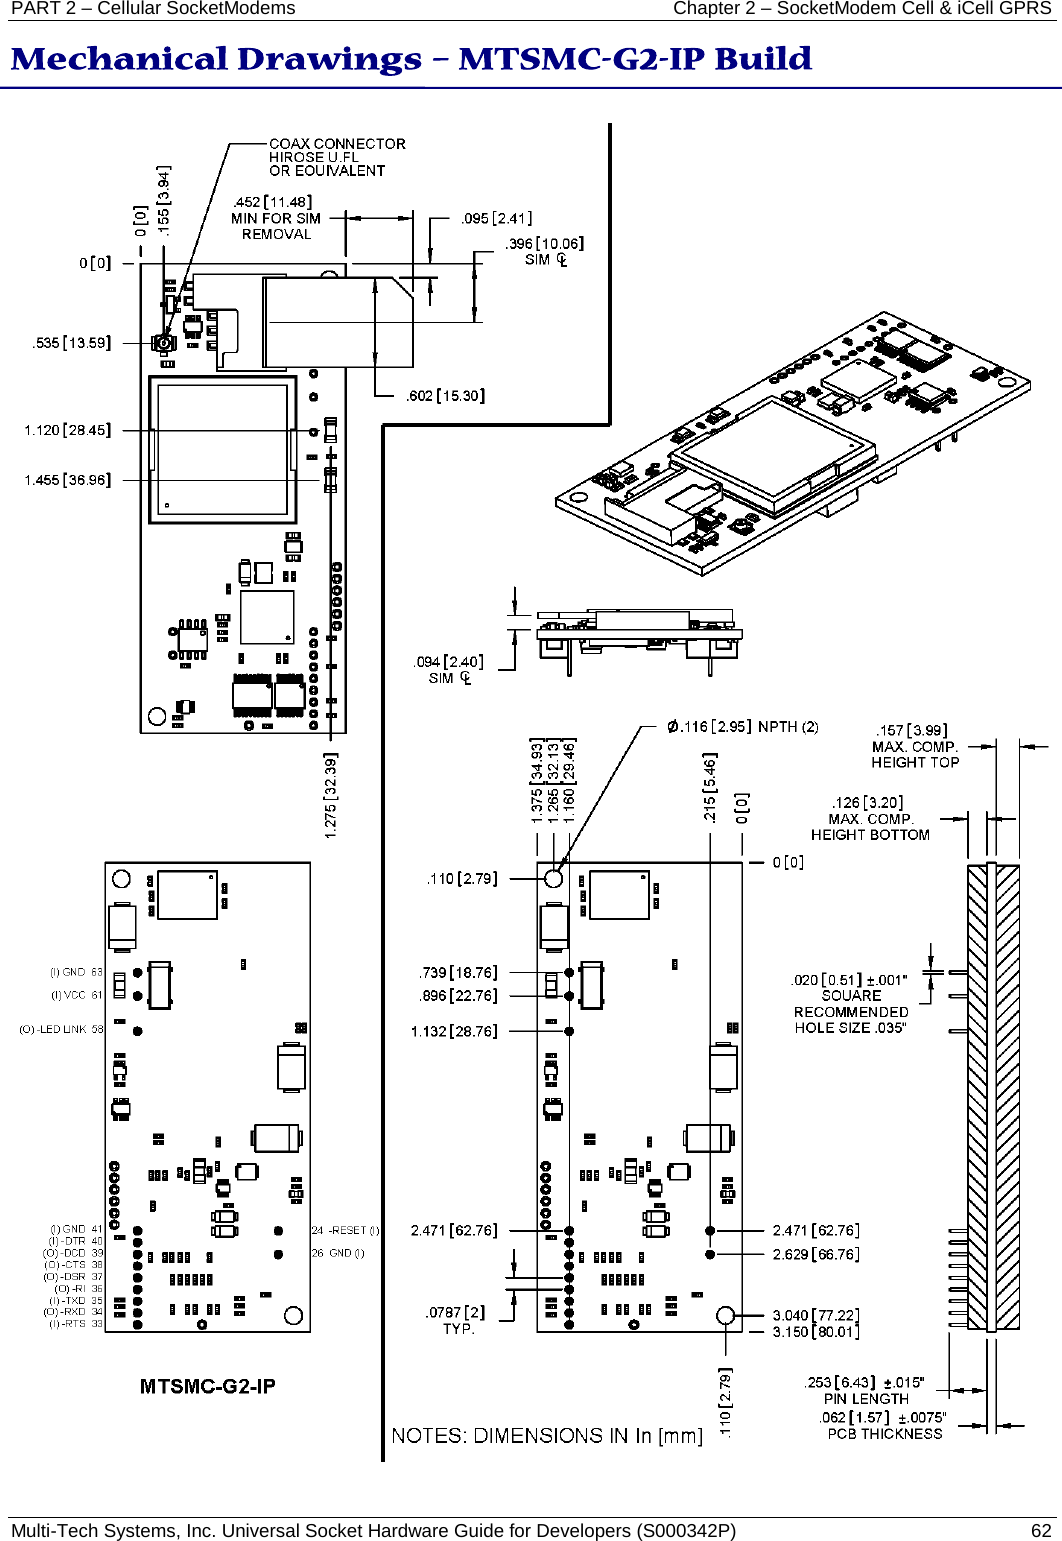 PART 2 – Cellular SocketModems  Chapter 2 – SocketModem Cell &amp; iCell GPRS Multi-Tech Systems, Inc. Universal Socket Hardware Guide for Developers (S000342P)  62  Mechanical Drawings – MTSMC-G2-IP Build 